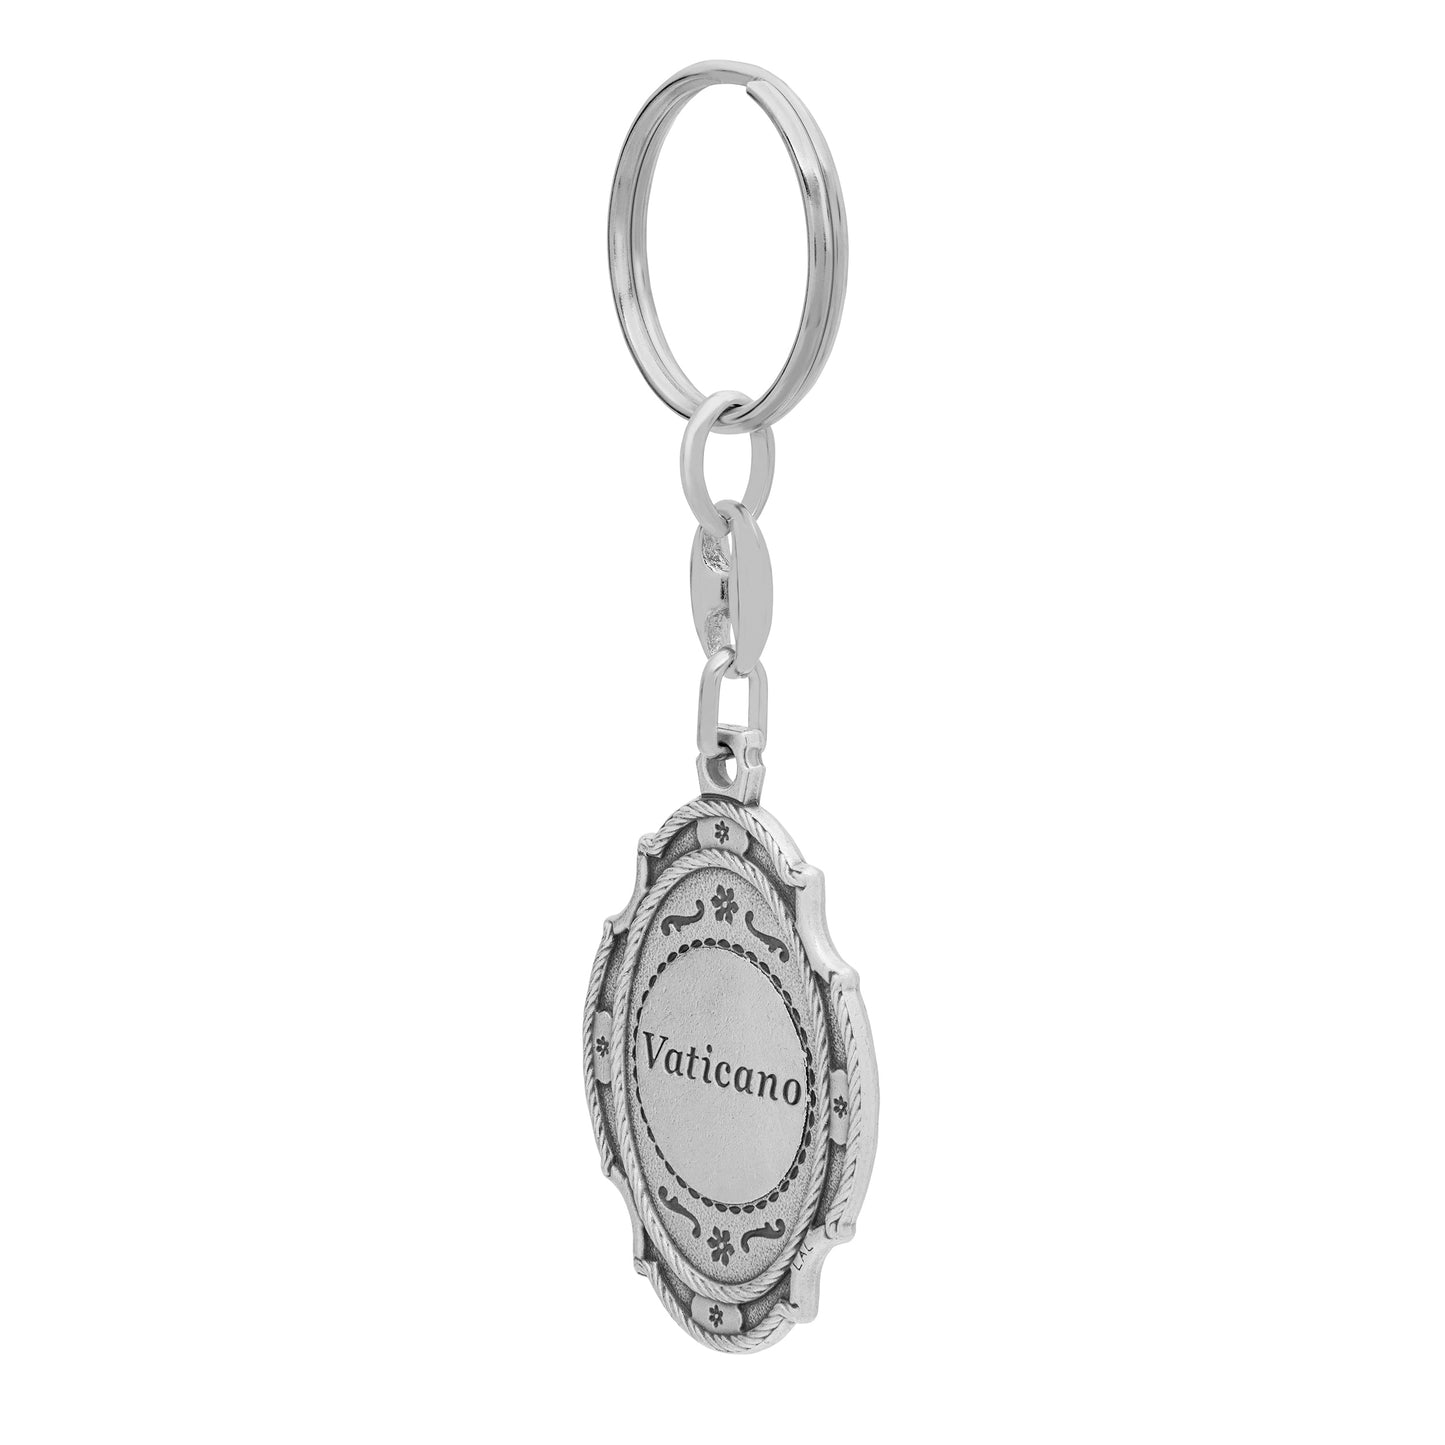 Mondo Cattolico Keychains Oval Colored Metal Keychain With Worked Frame of Mater Ecclesiae